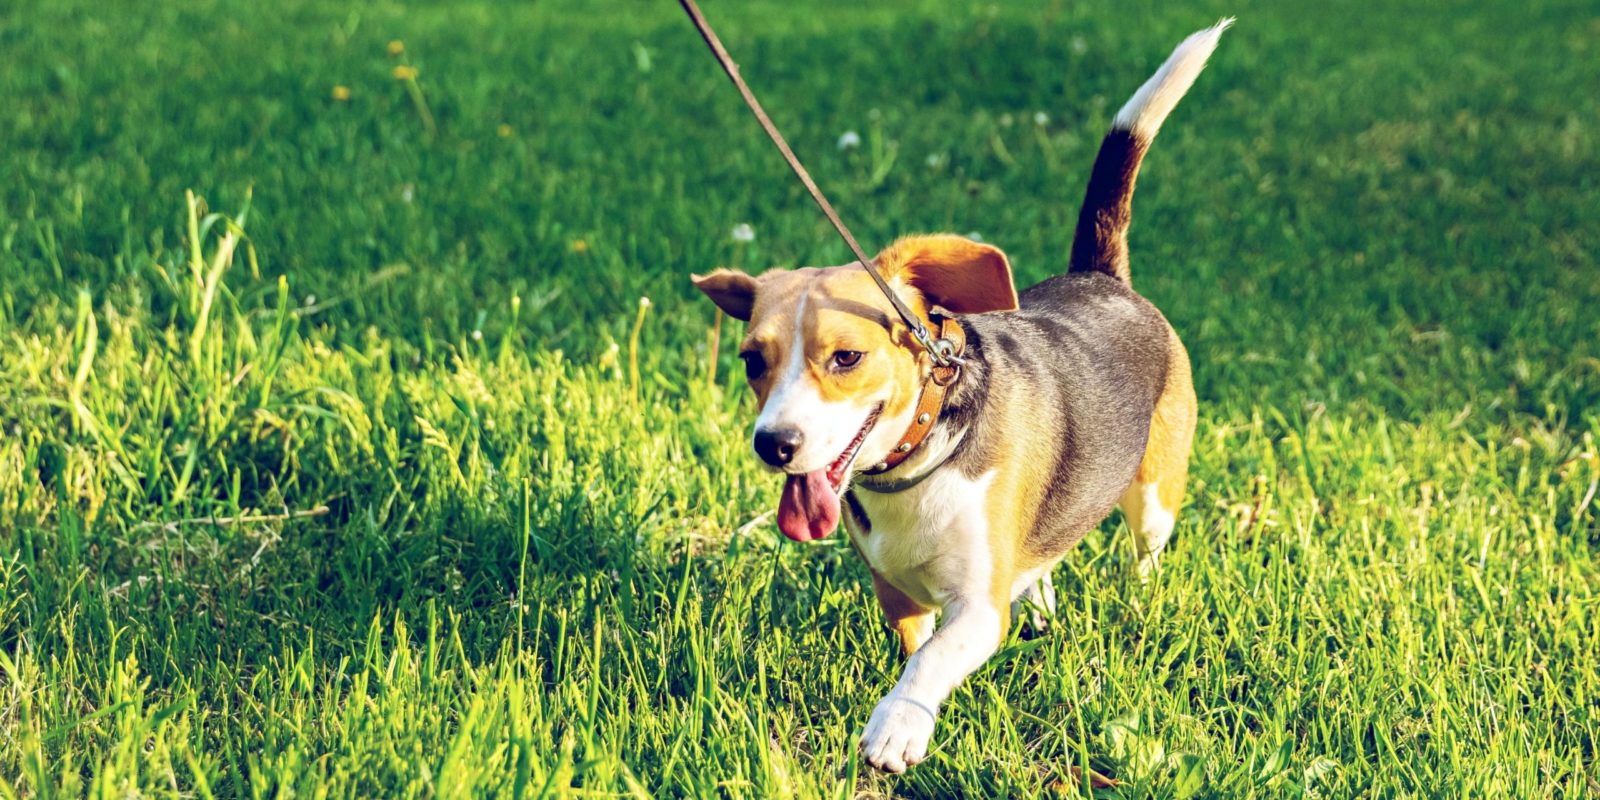 happy dog running in a grassy field while on vacation with their owner